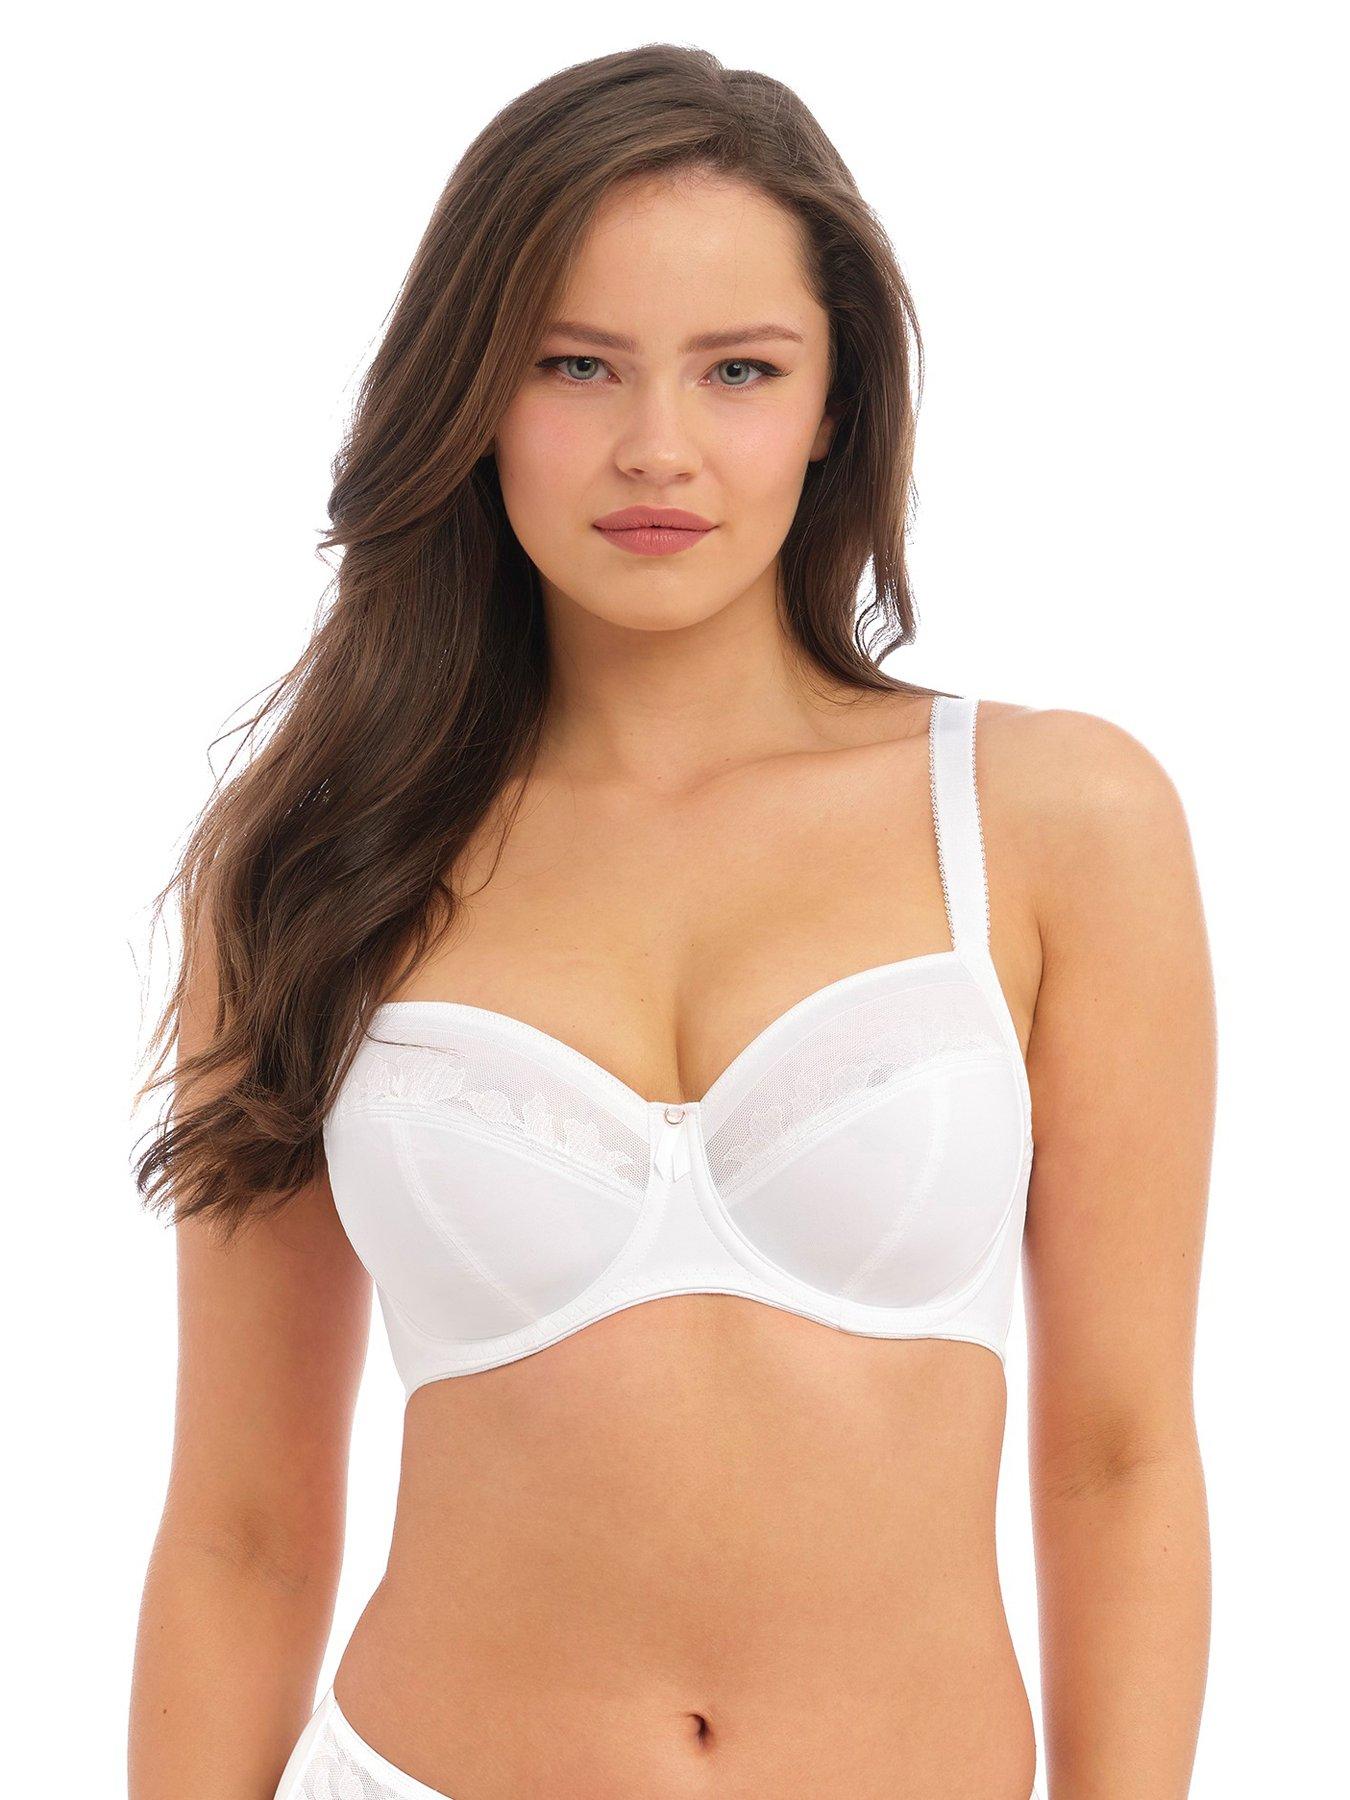 Bra 32 to 40 B or D cup Tendy Cotton Everyday 18MM- Wide Straps Bra Full